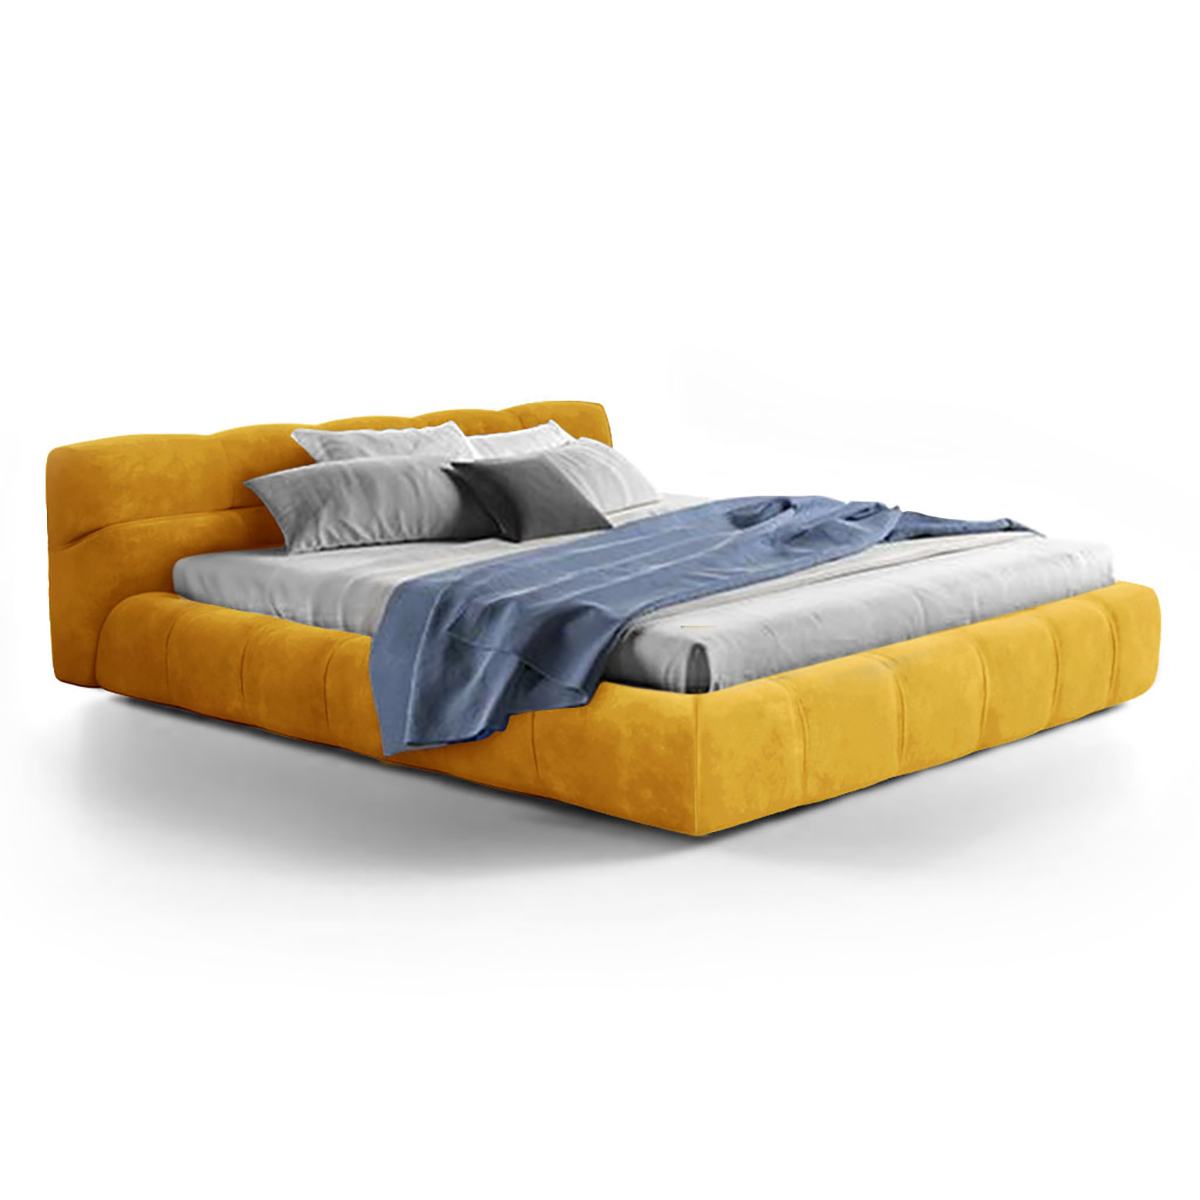 Tufted Bed Chenille Helios-Mustard Yellow / California King Size